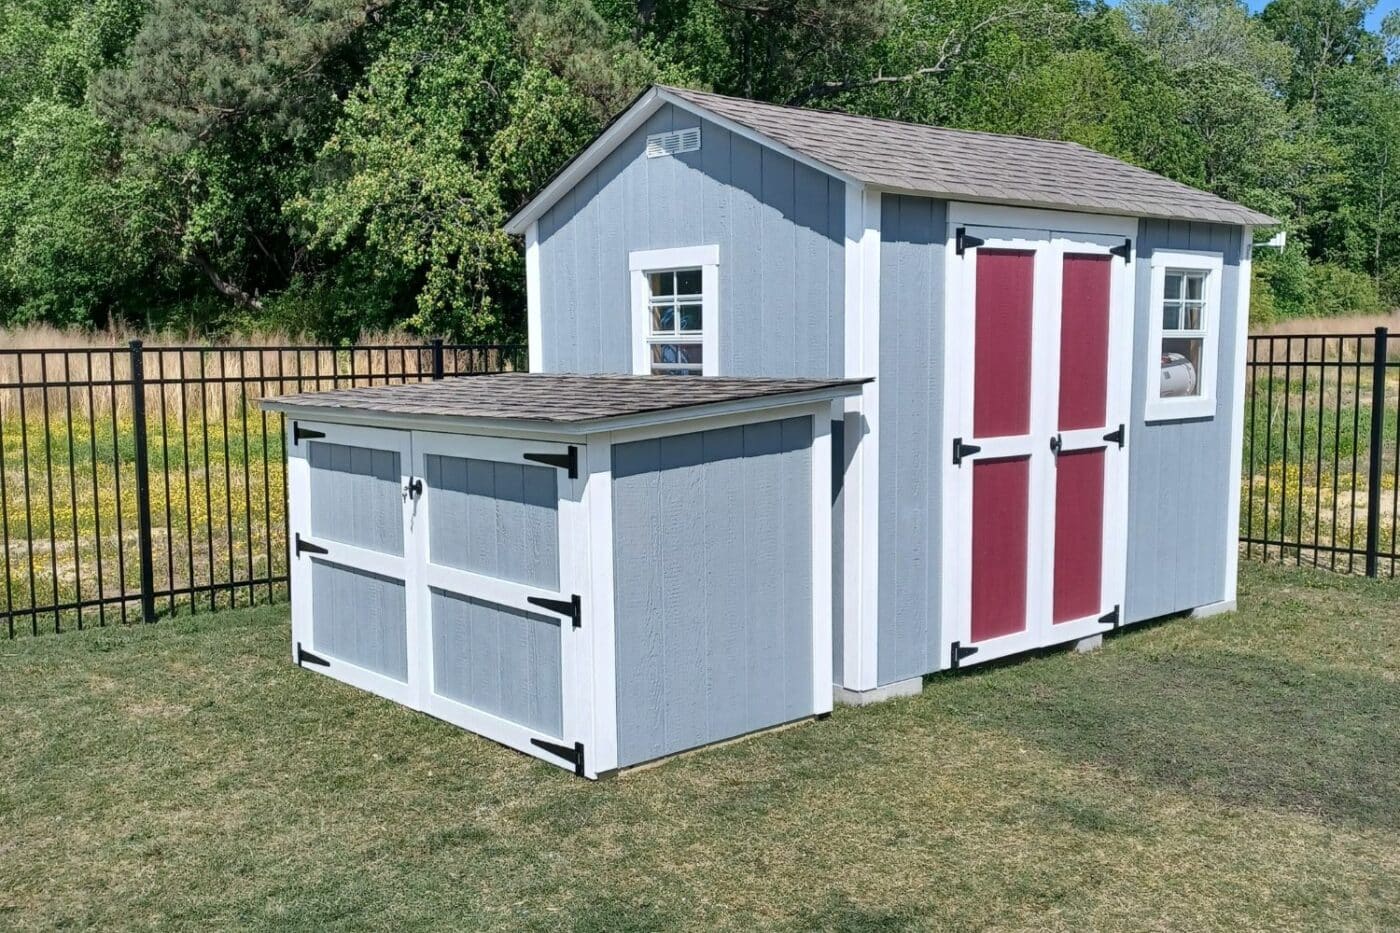 tidewater a-frame shed for sale in VA and NC